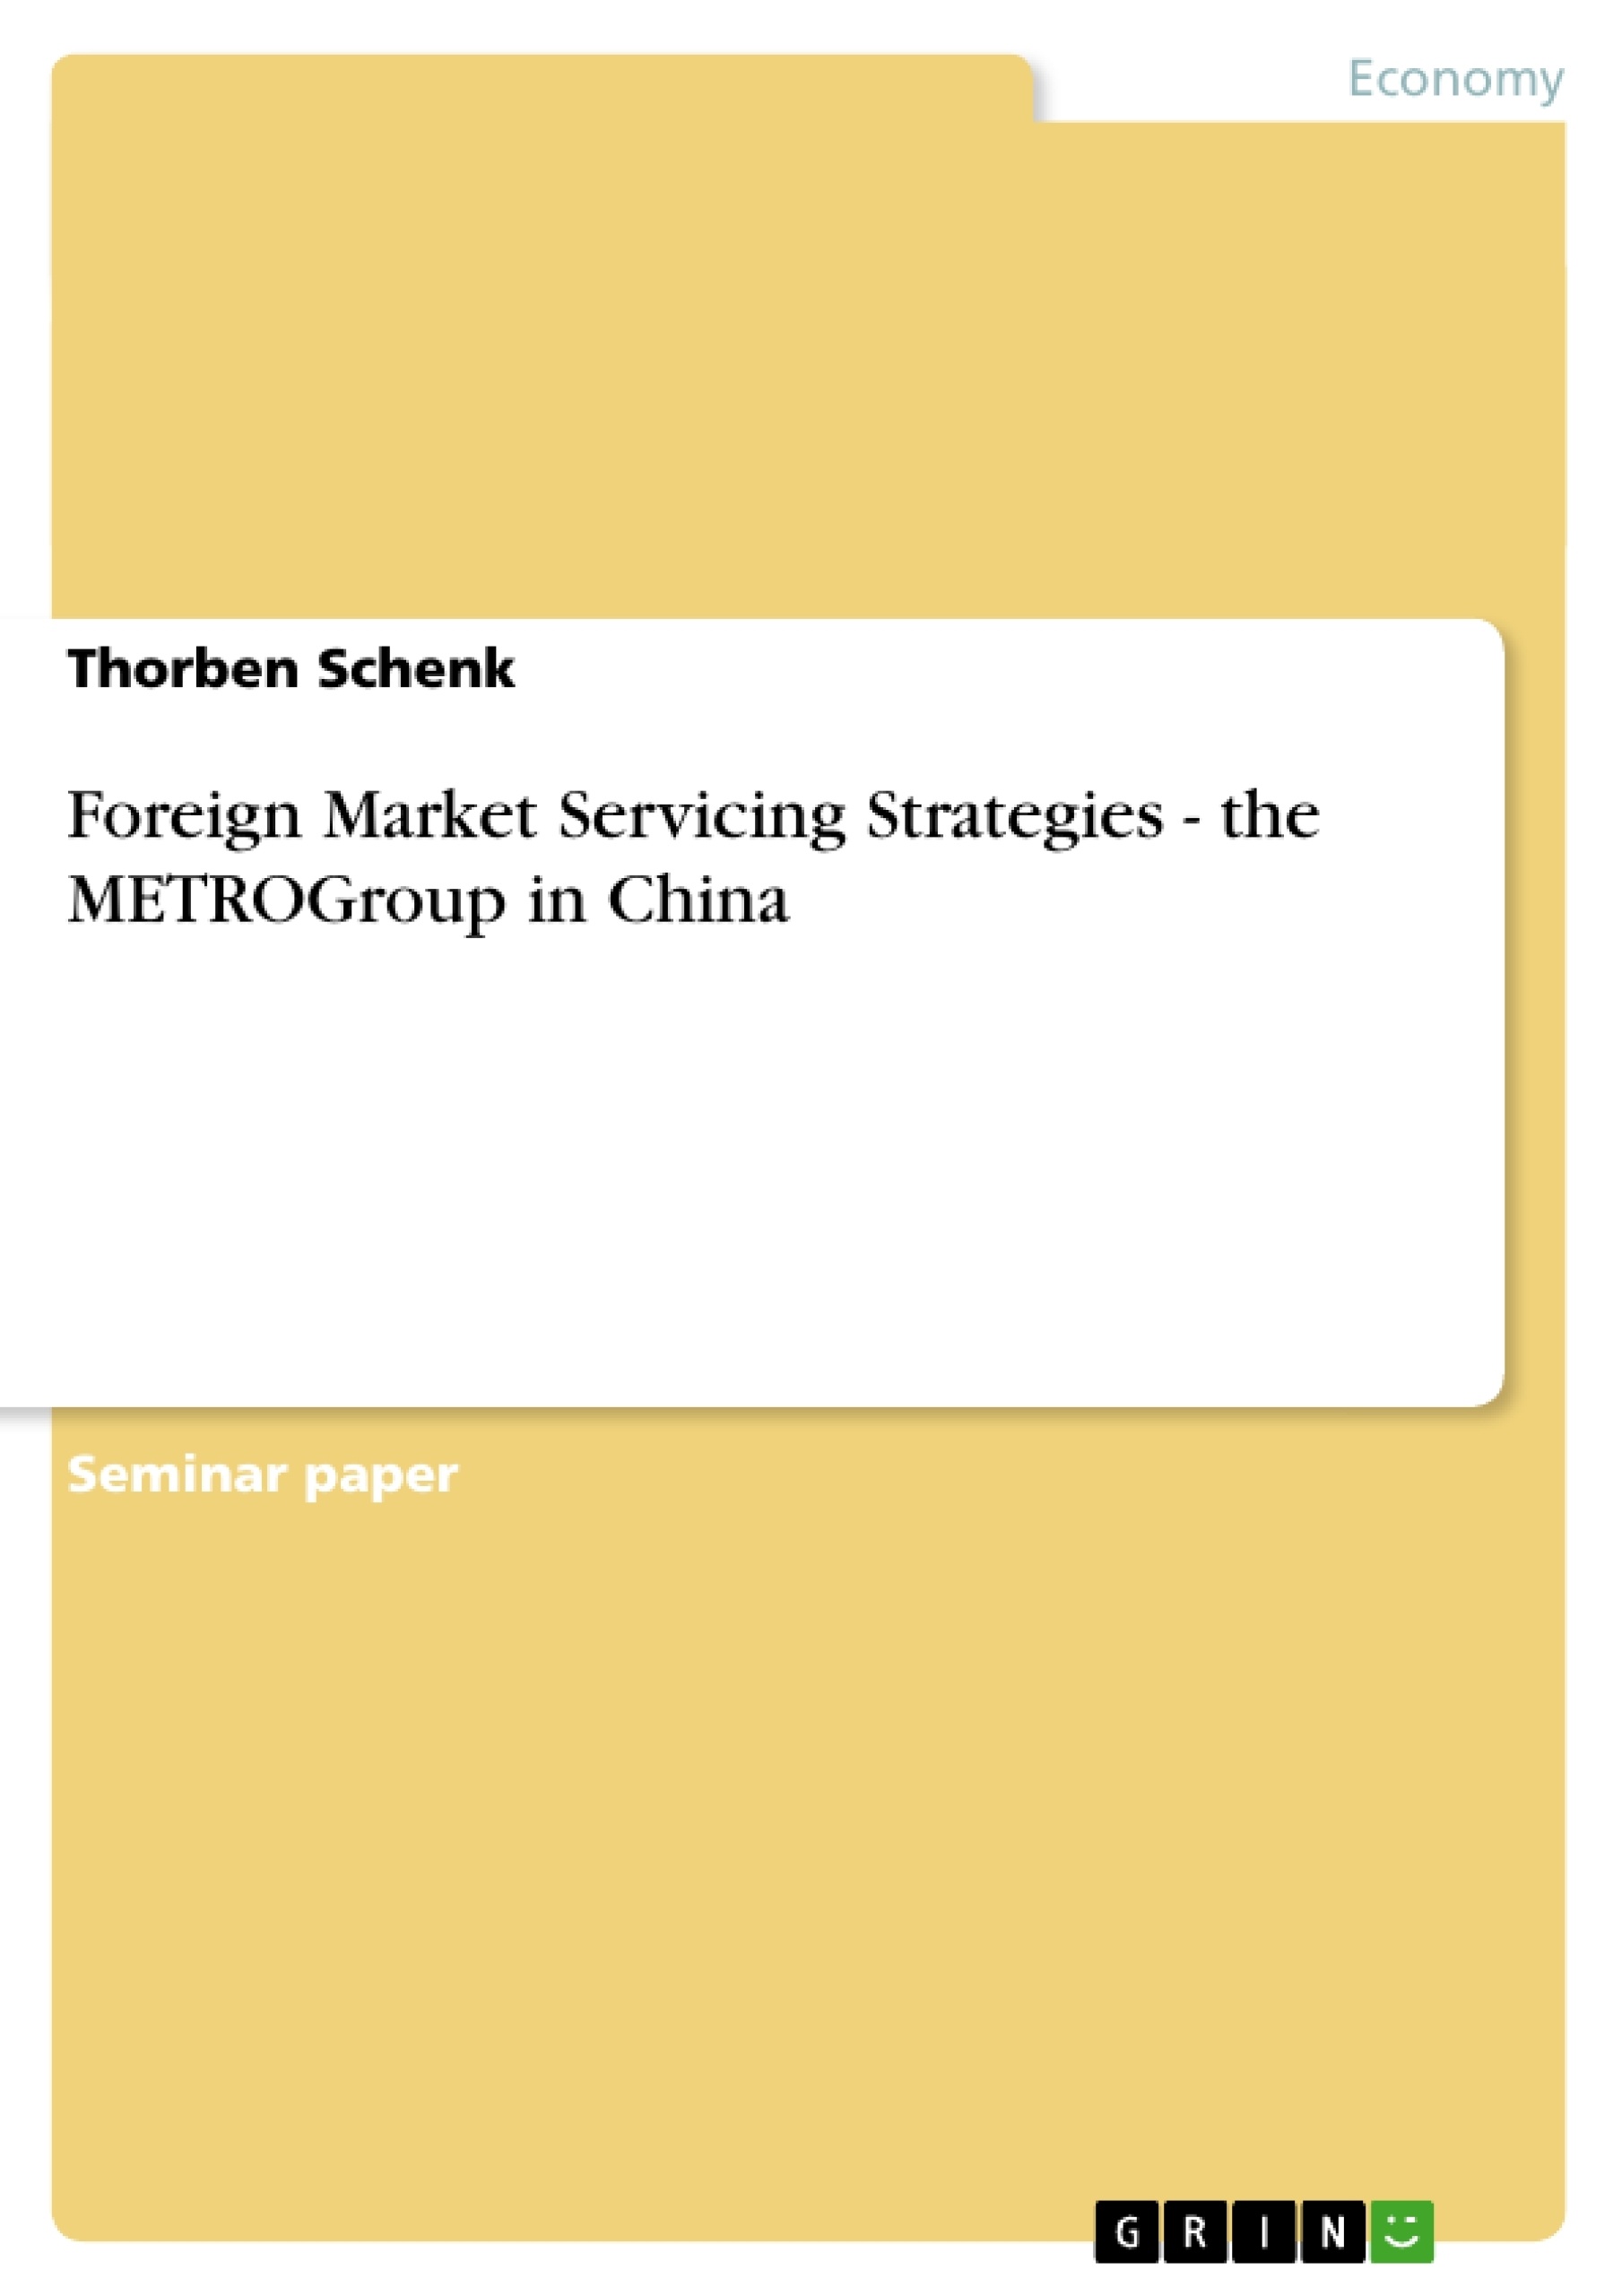 Title: Foreign Market Servicing Strategies - the METROGroup in China